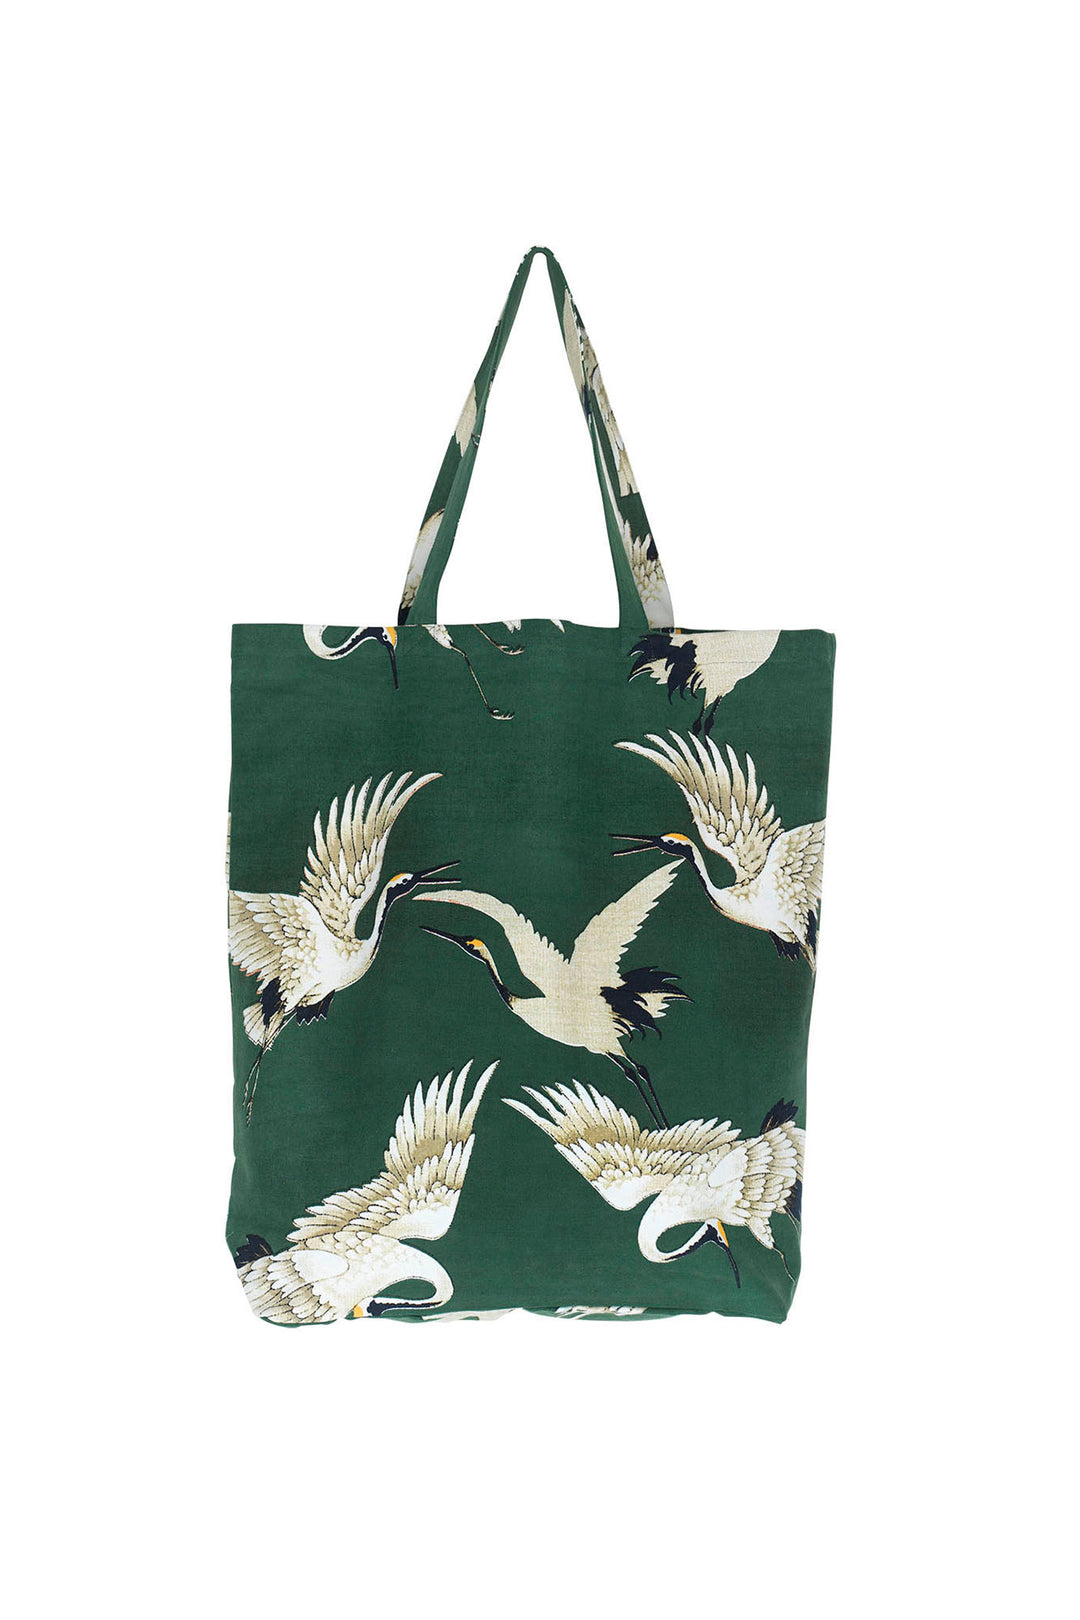 ladies shopping bag handbag canvas green background with stork bird print by One Hundred Stars